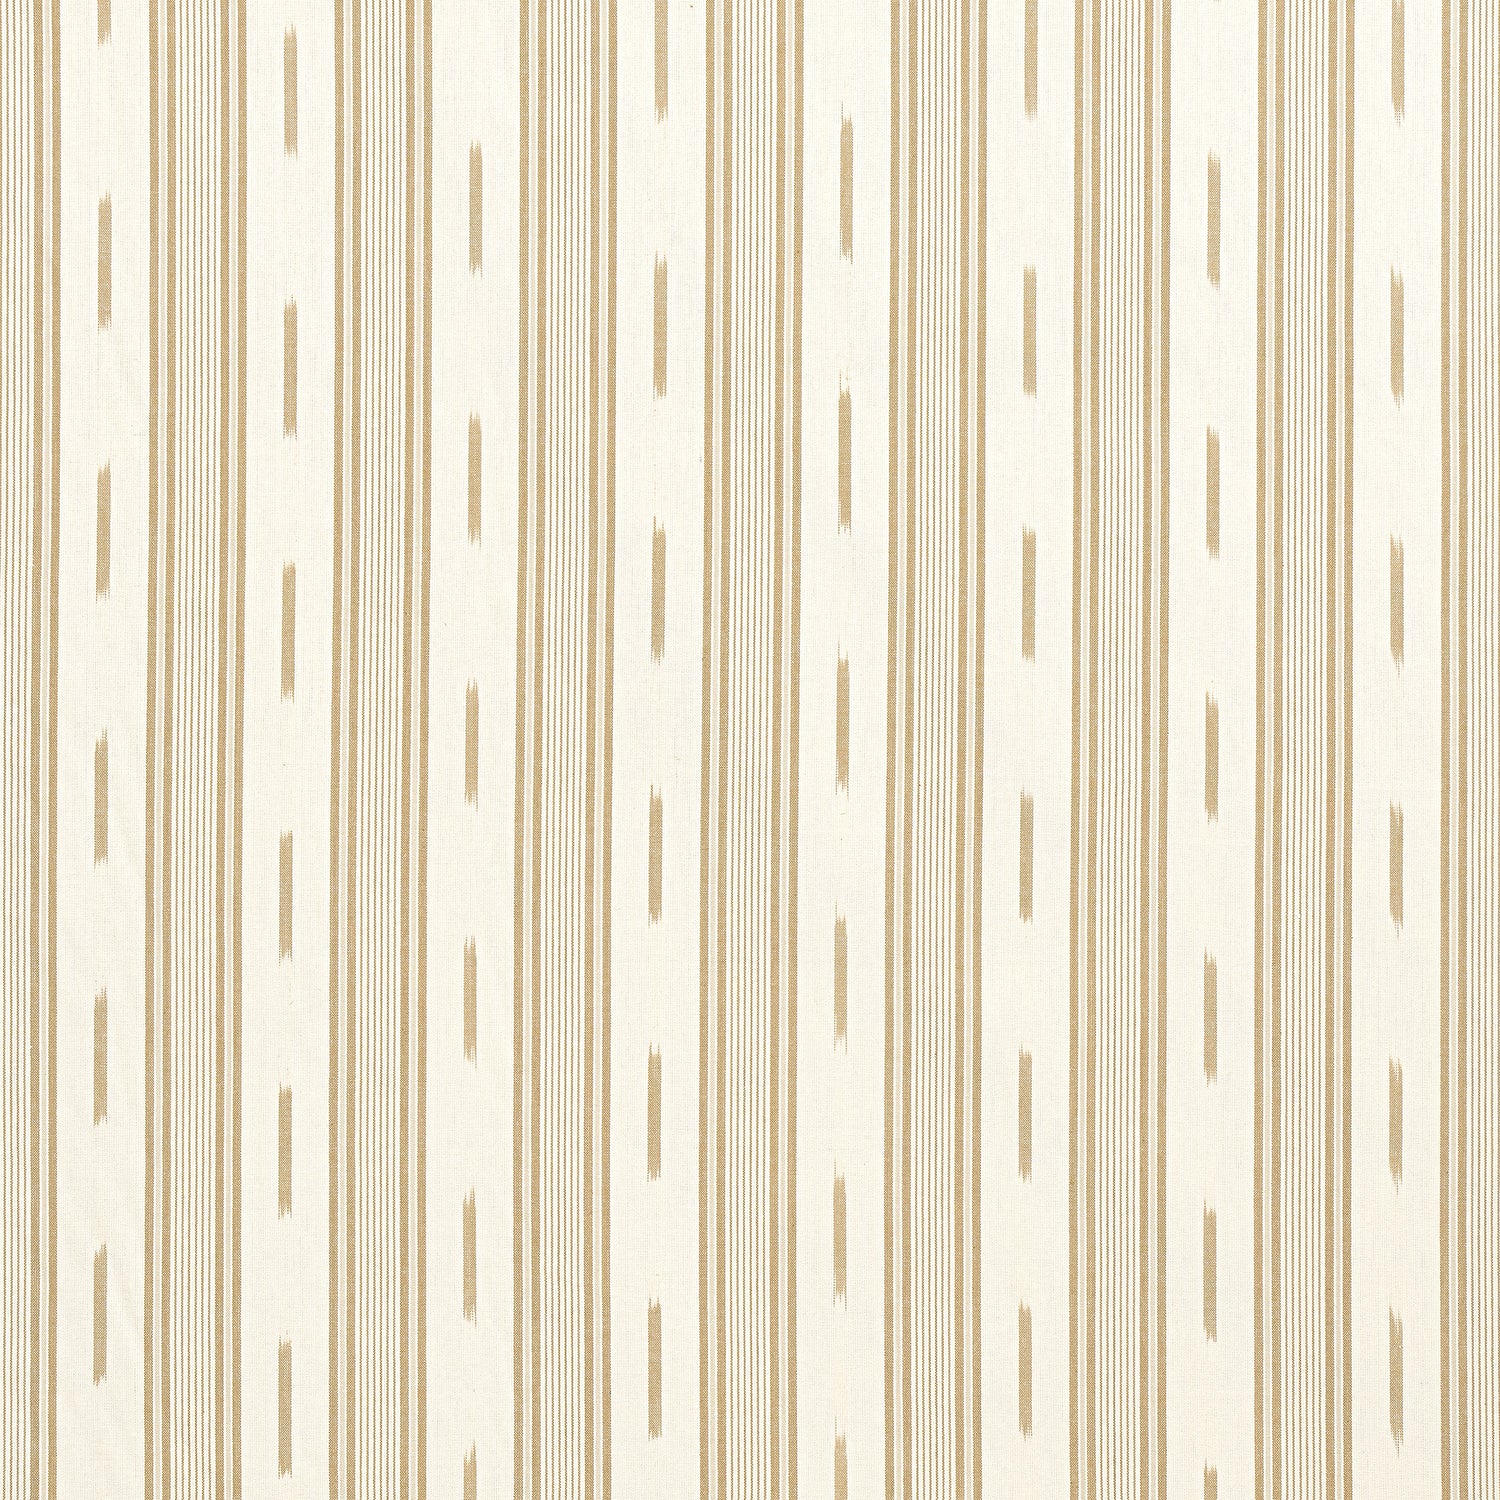 Odeshia Stripe fabric in camel color - pattern number W781306 - by Thibaut in the Montecito collection